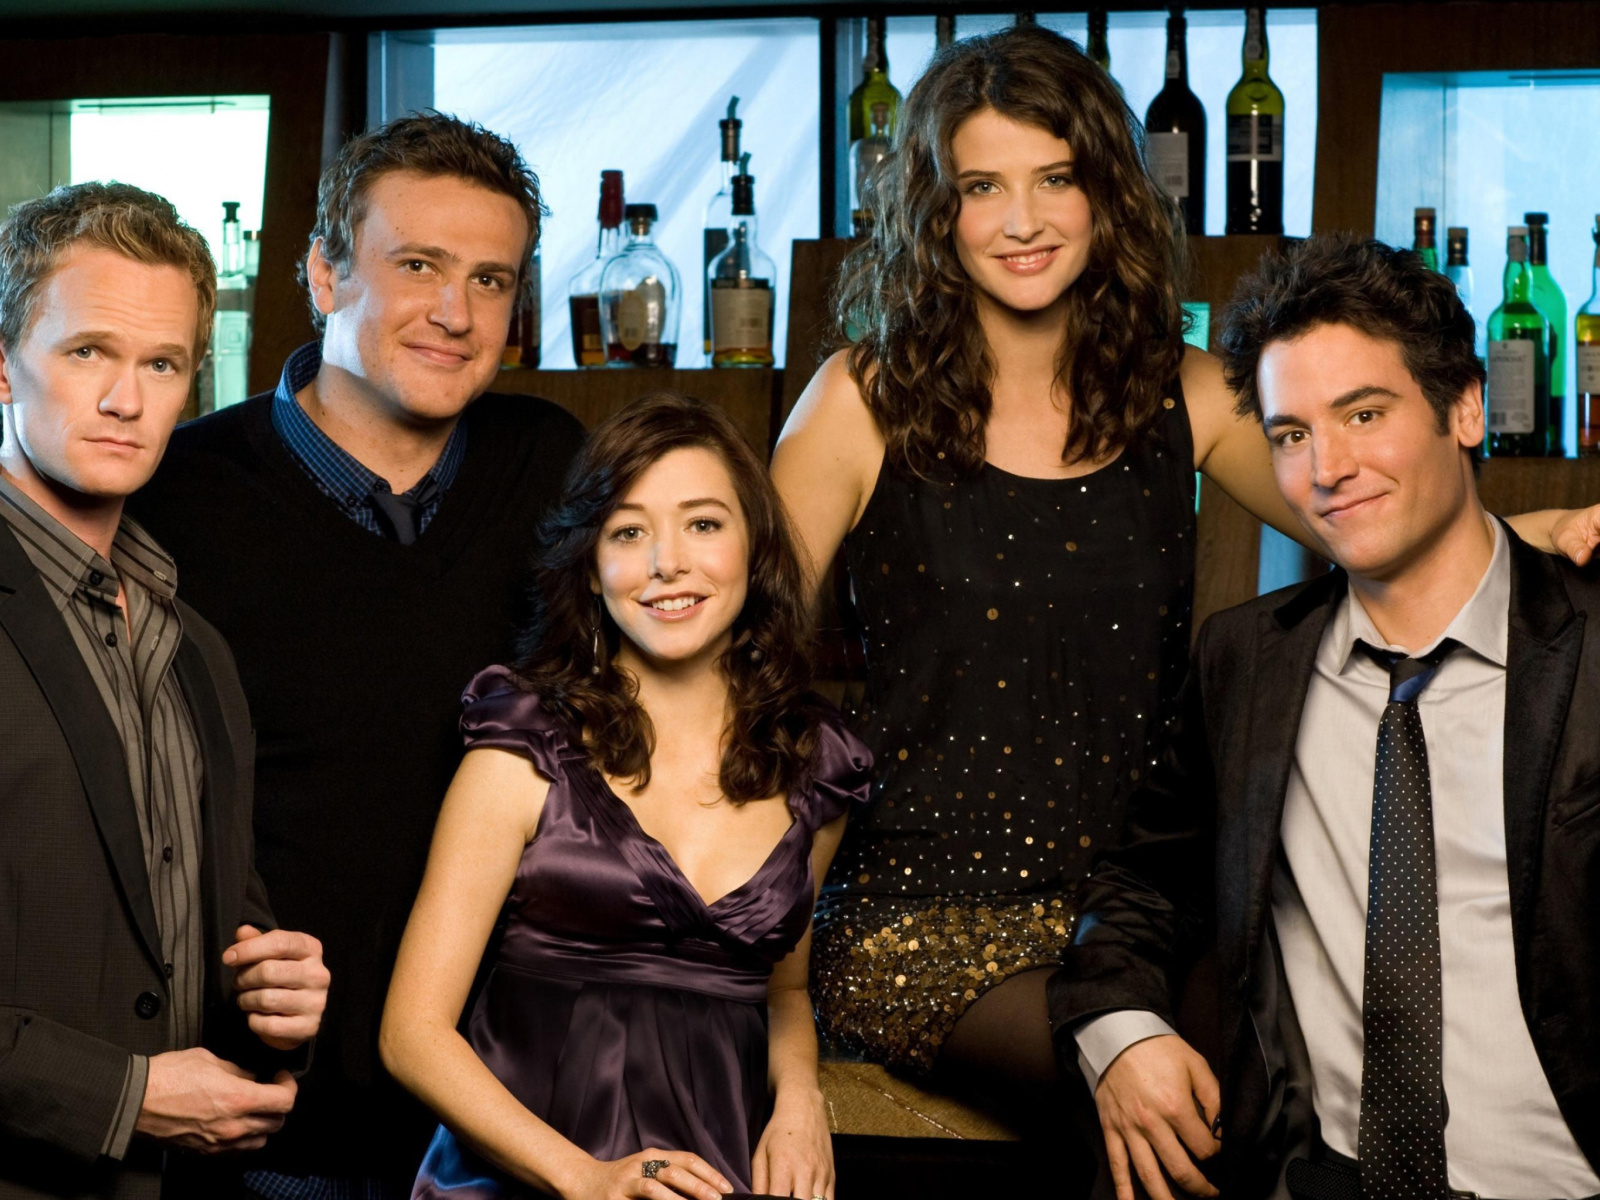 Sfondi How I Met Your Mother in Bar 1600x1200